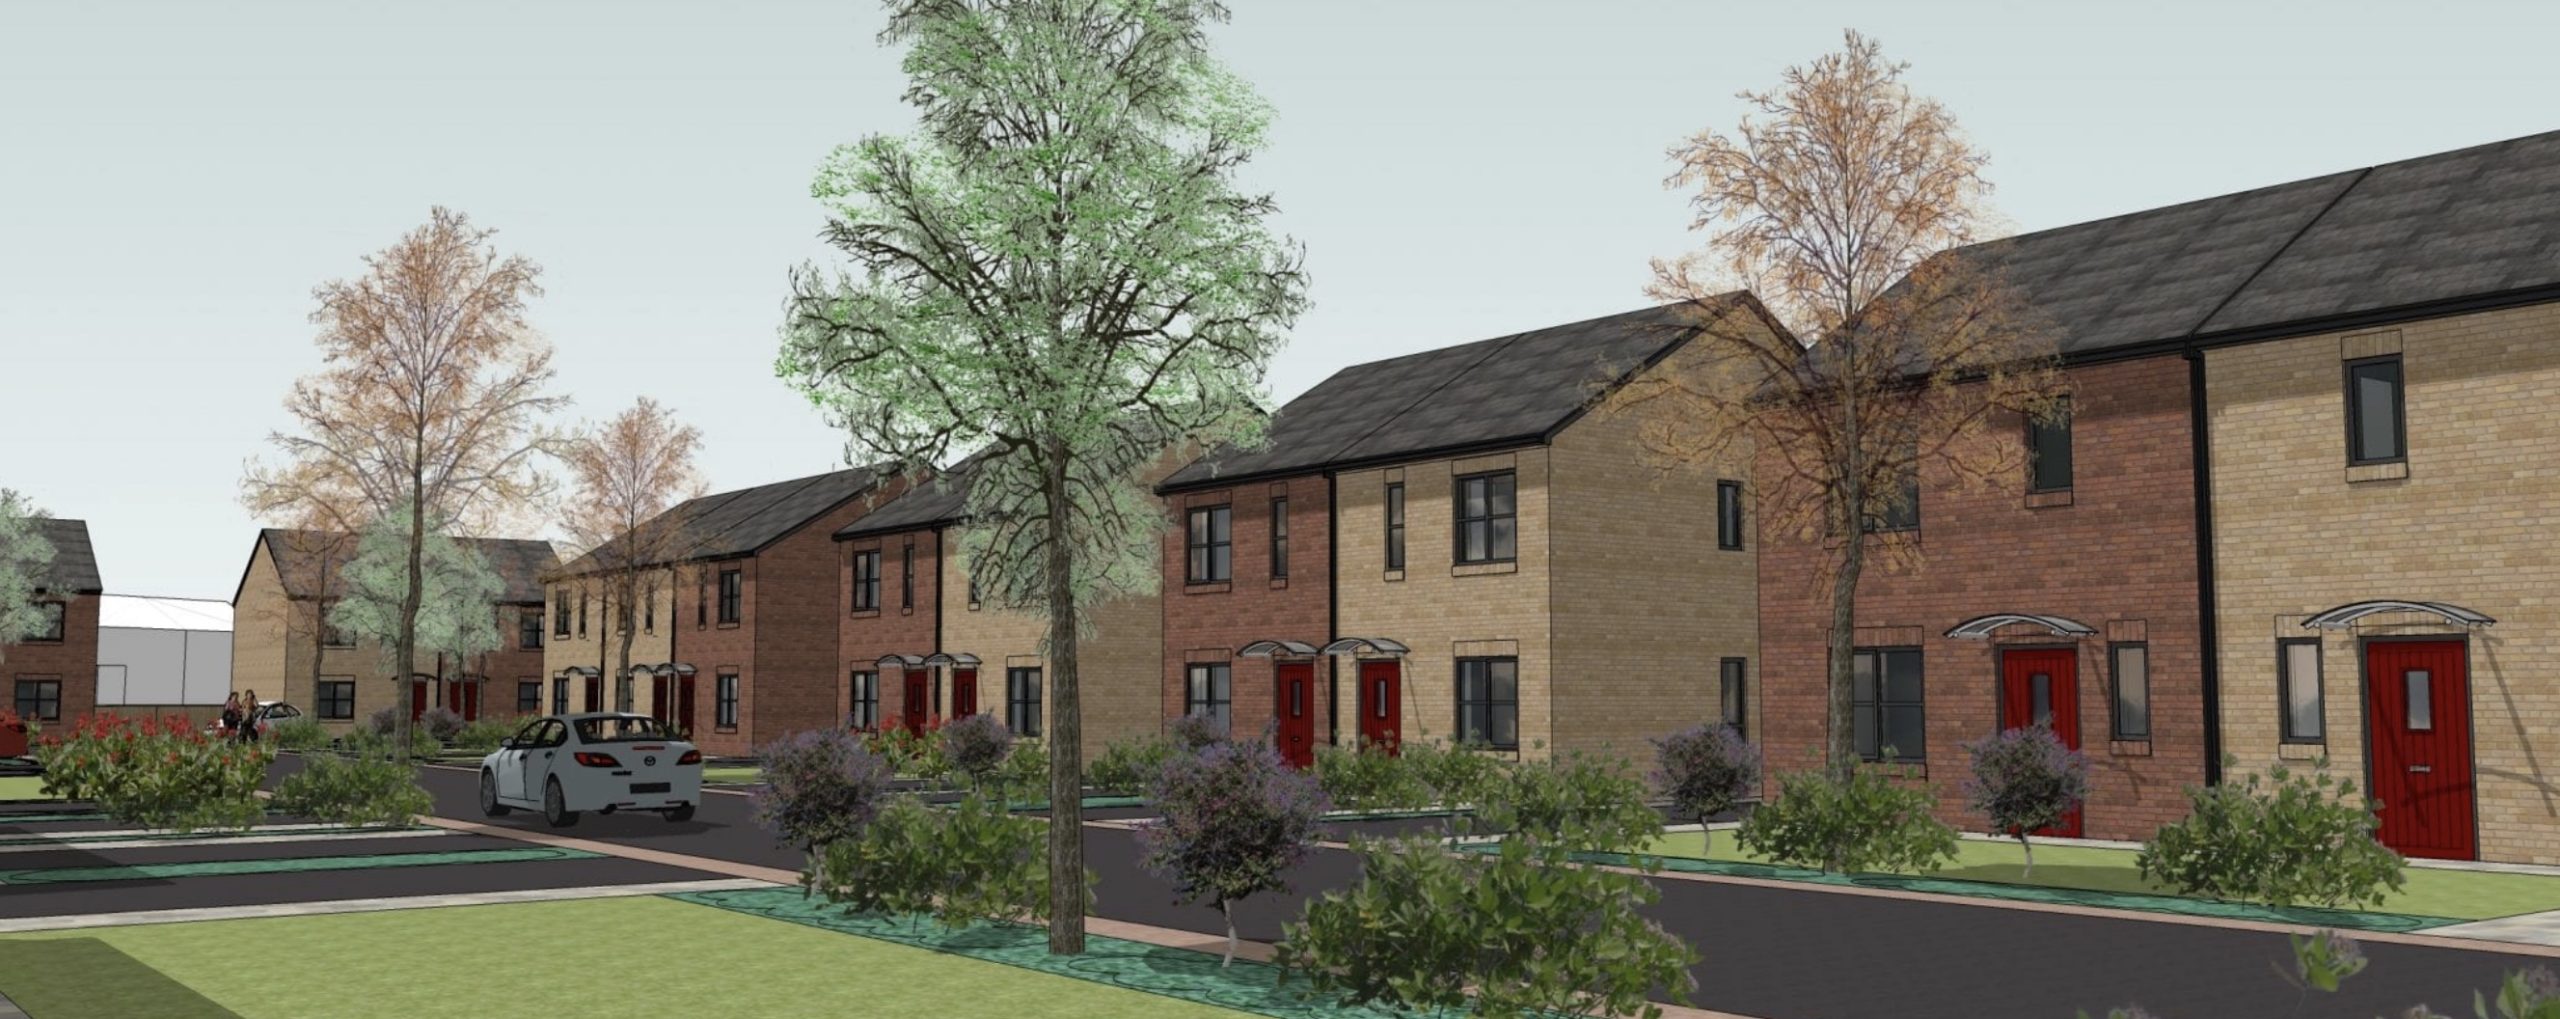 Work Commences on £9.2m Affordable Housing Scheme in Castleford